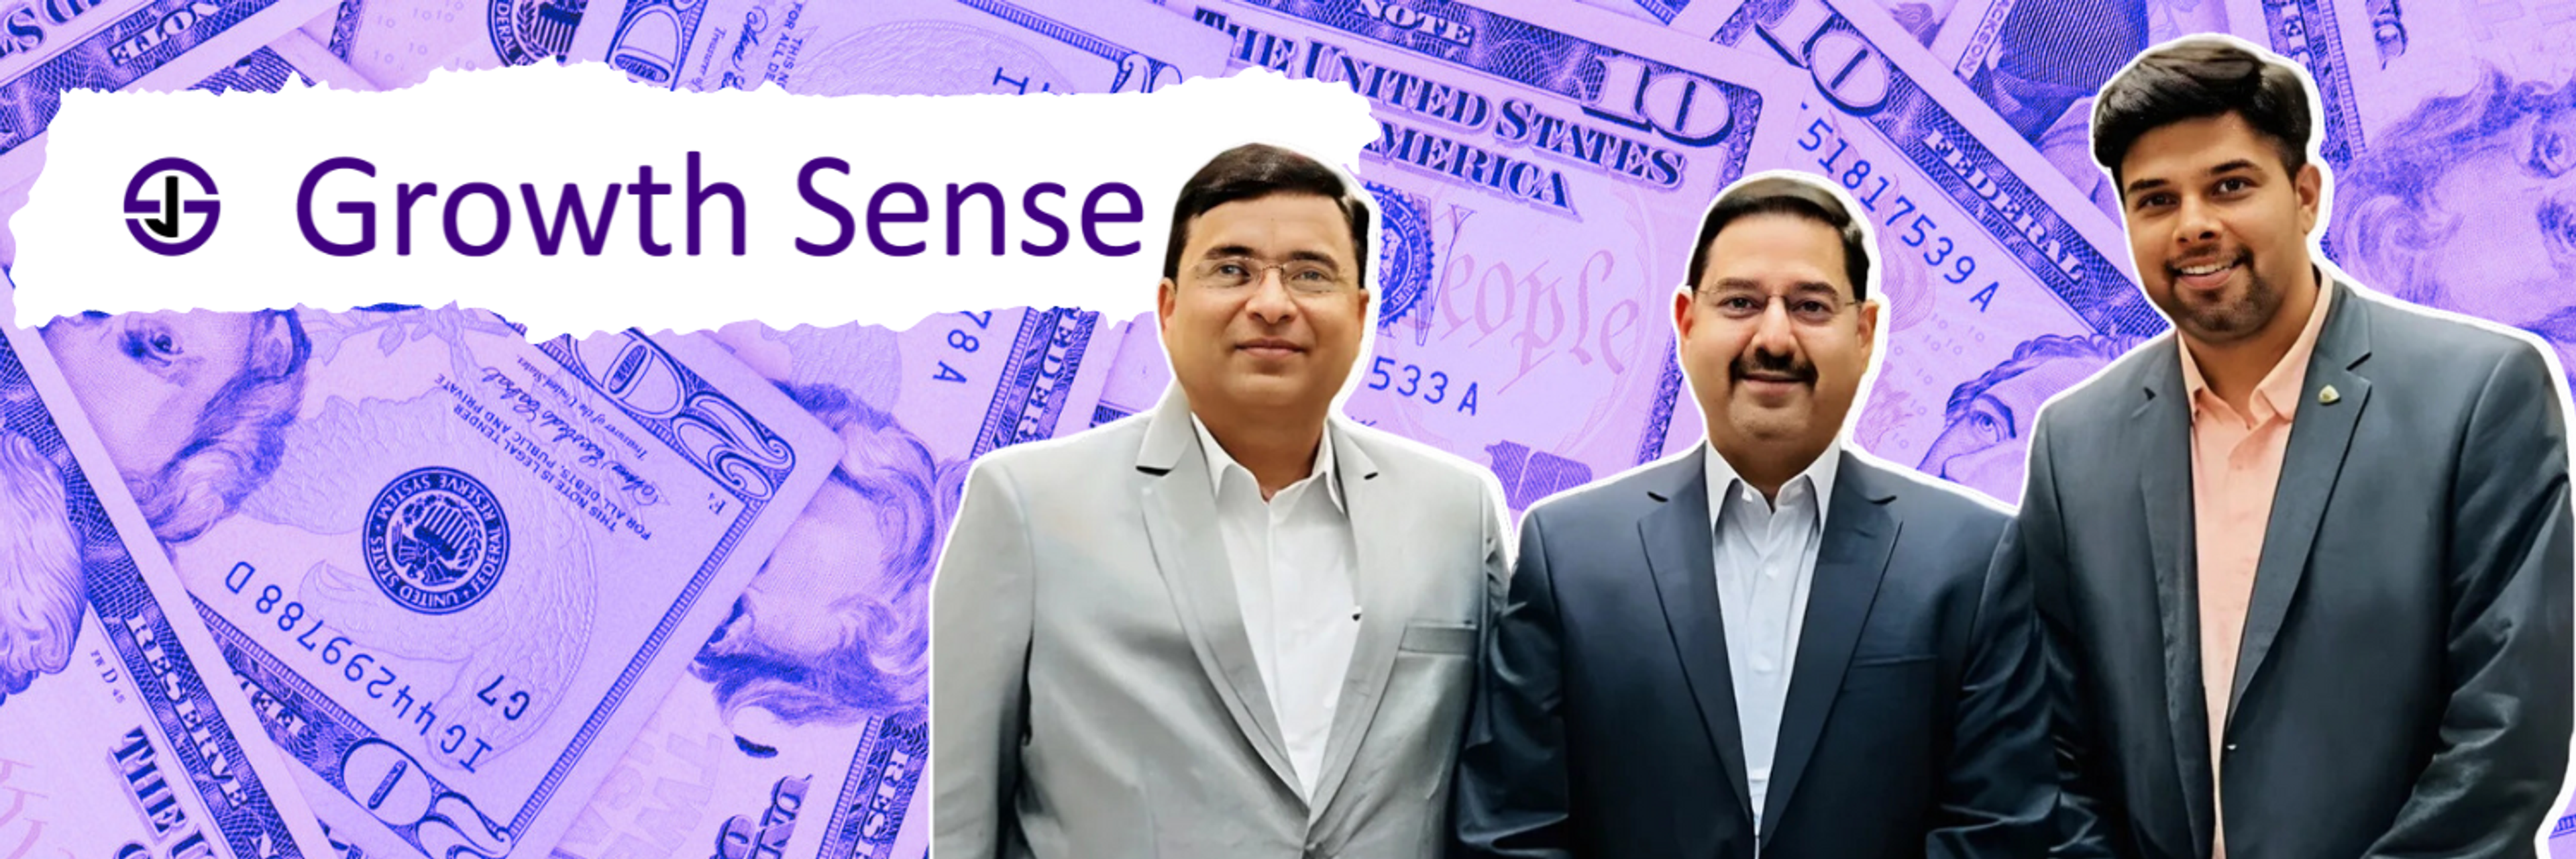 Three men, Jimish Kapadia, Sanjay Sarda, and Sushant Bhasin, in business attire stand in front of a backdrop featuring US dollar bills and the Growth Sense logo, symbolizing their success in securing $600,000 in funding for their startup ecosystem.